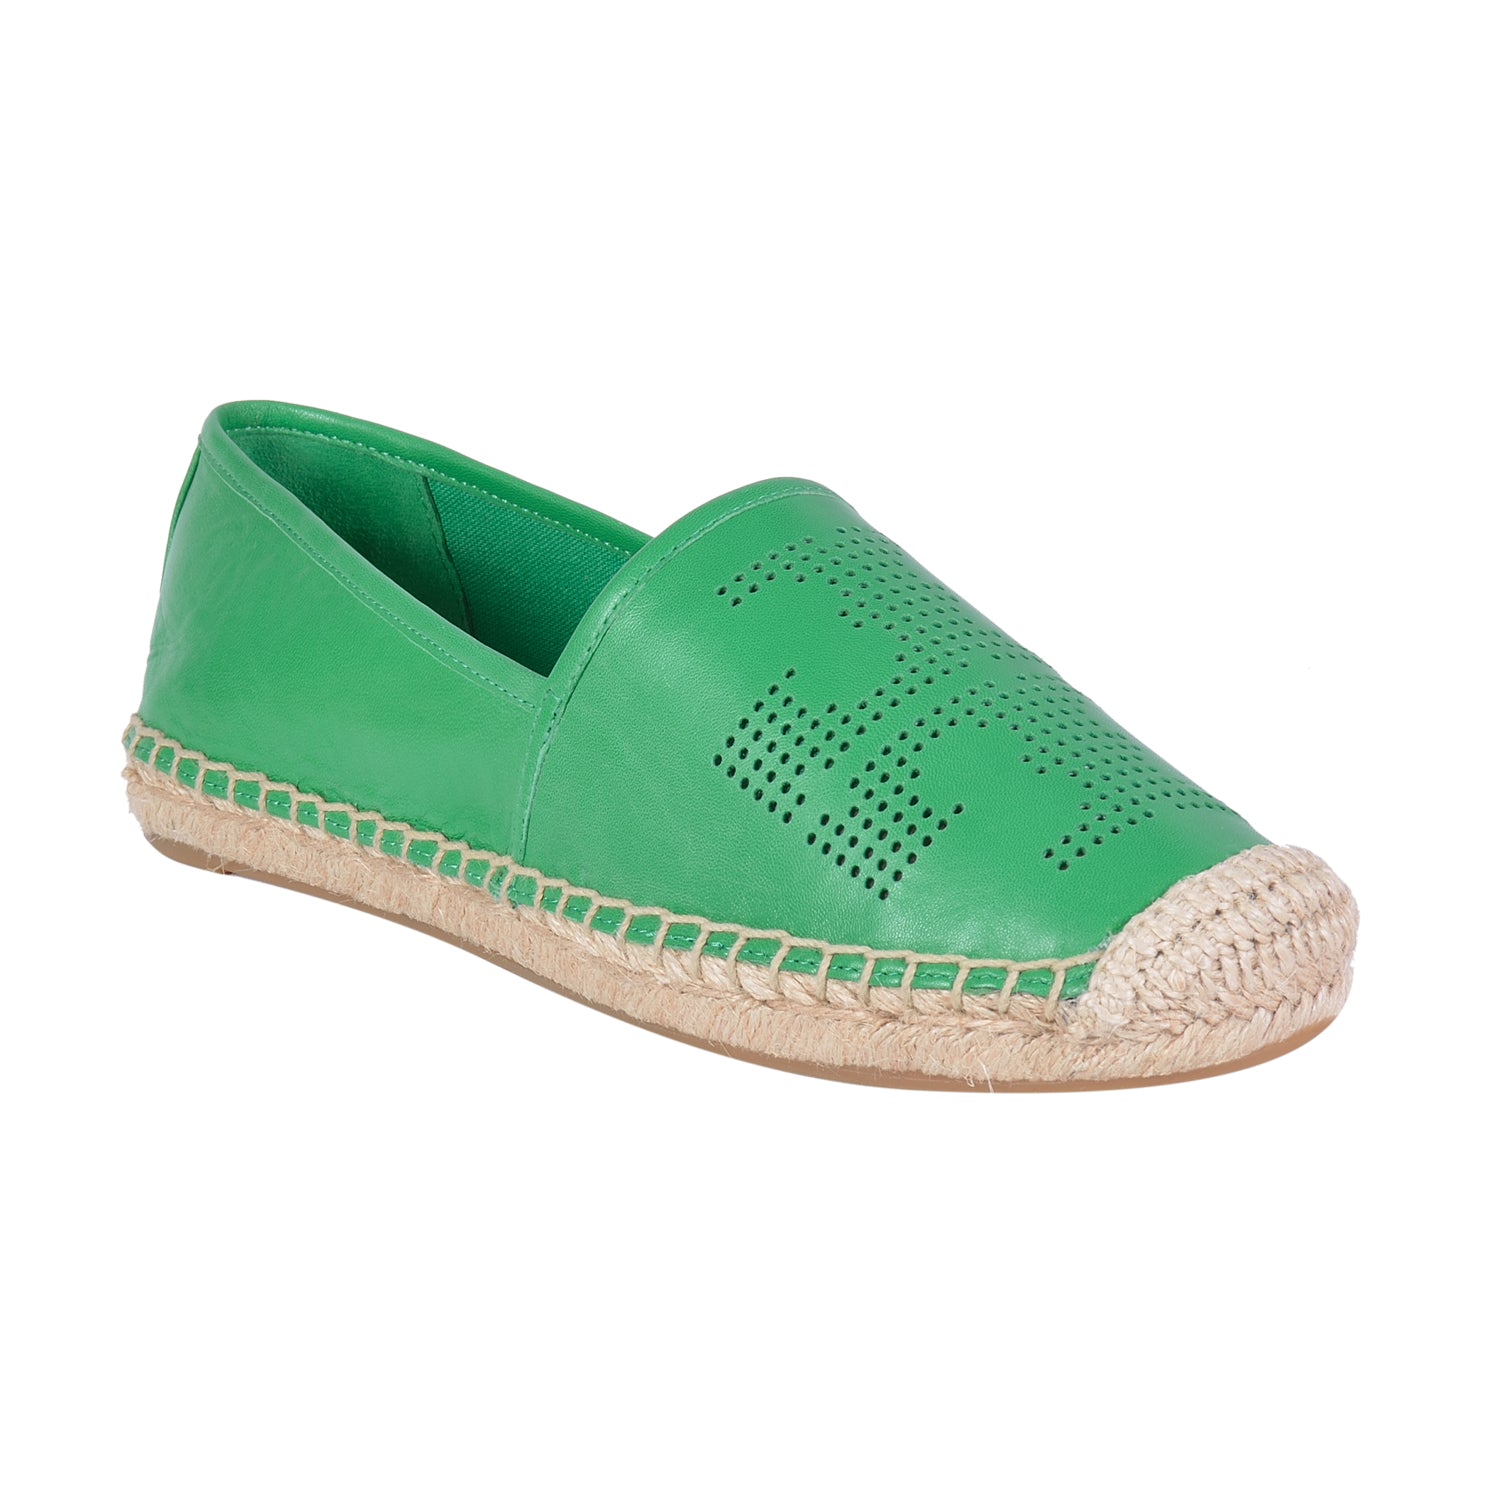 tory burch perforated espadrilles